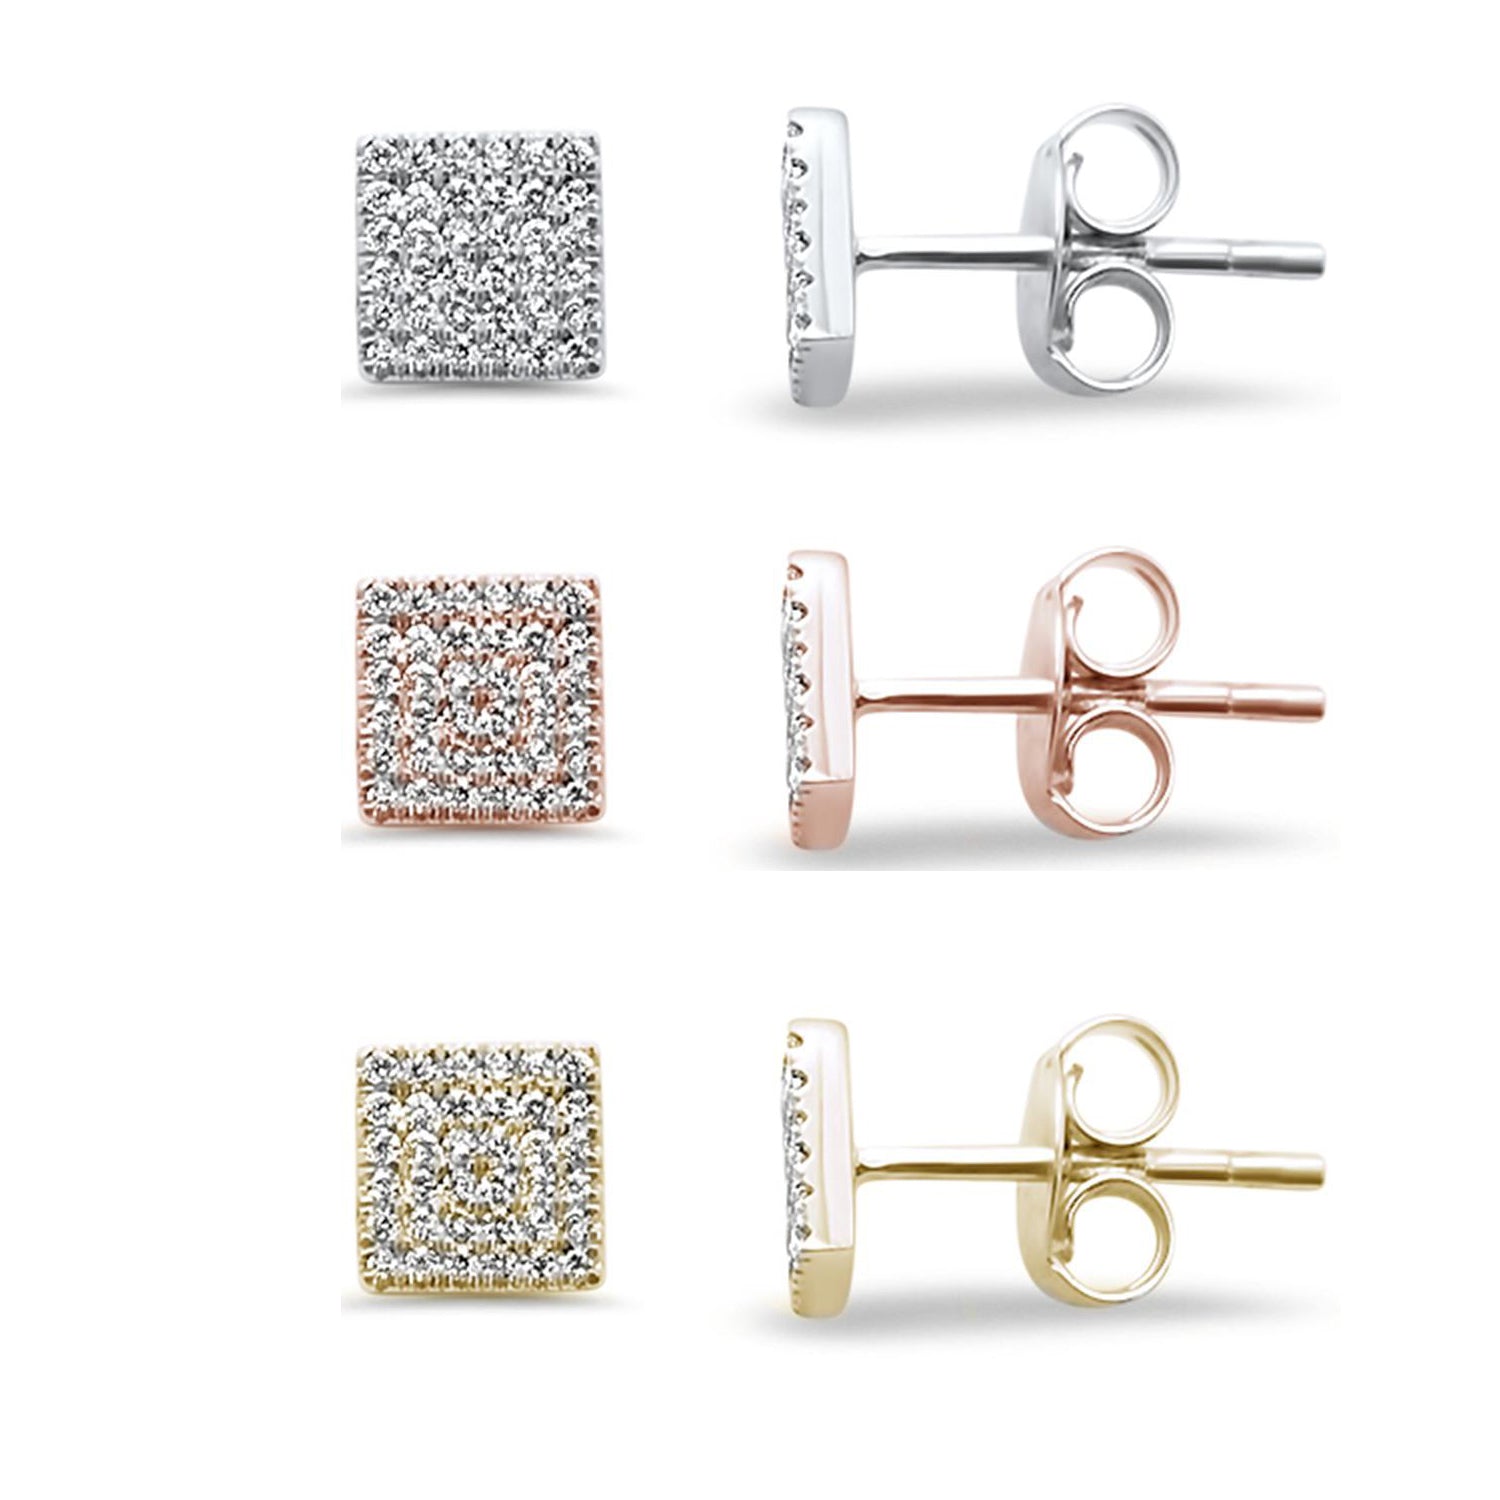 ''SPECIAL! .12ct 14kt Gold Trendy Square Diamond Stud EARRINGS''